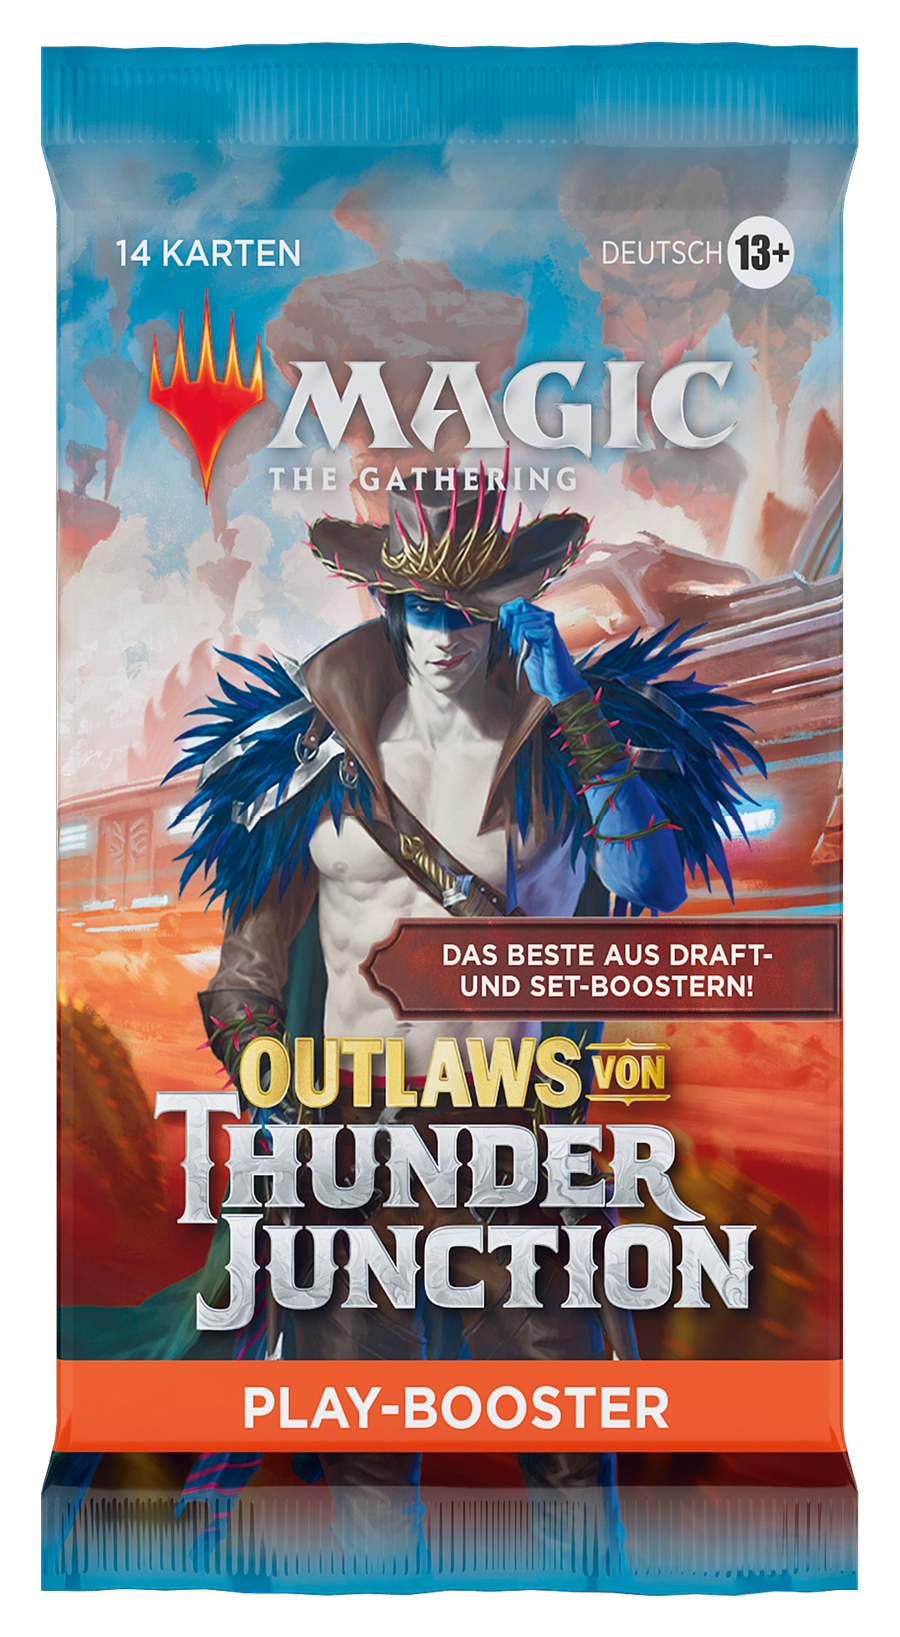 Outlaws von Thunder Junction - Play-Booster - DE